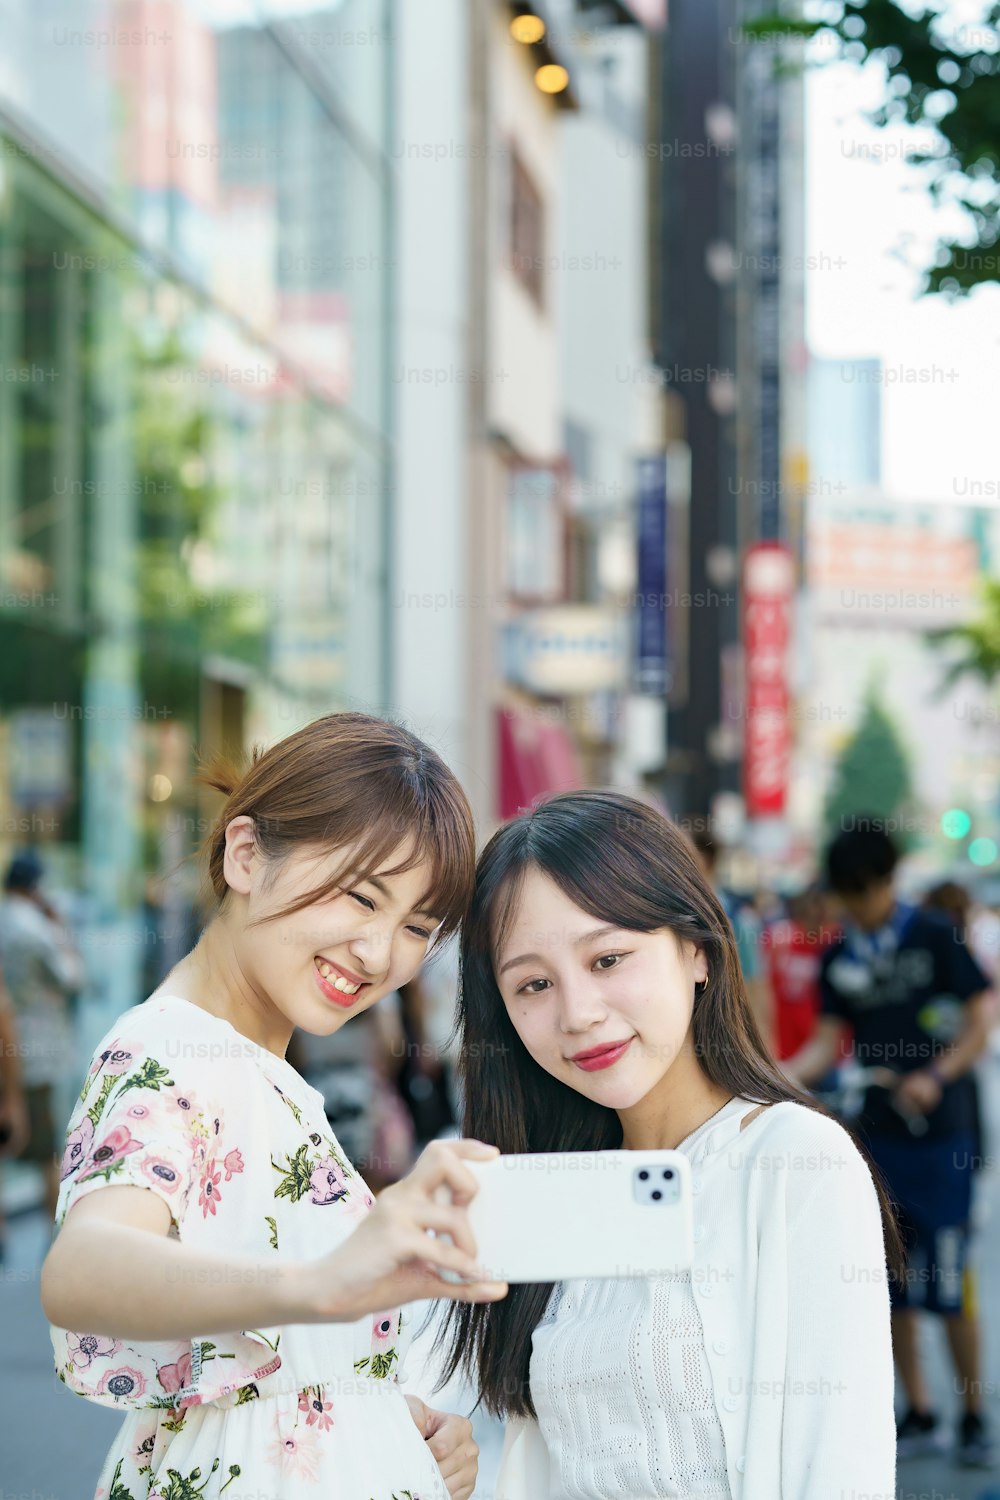 Two young women taking selfies in the city